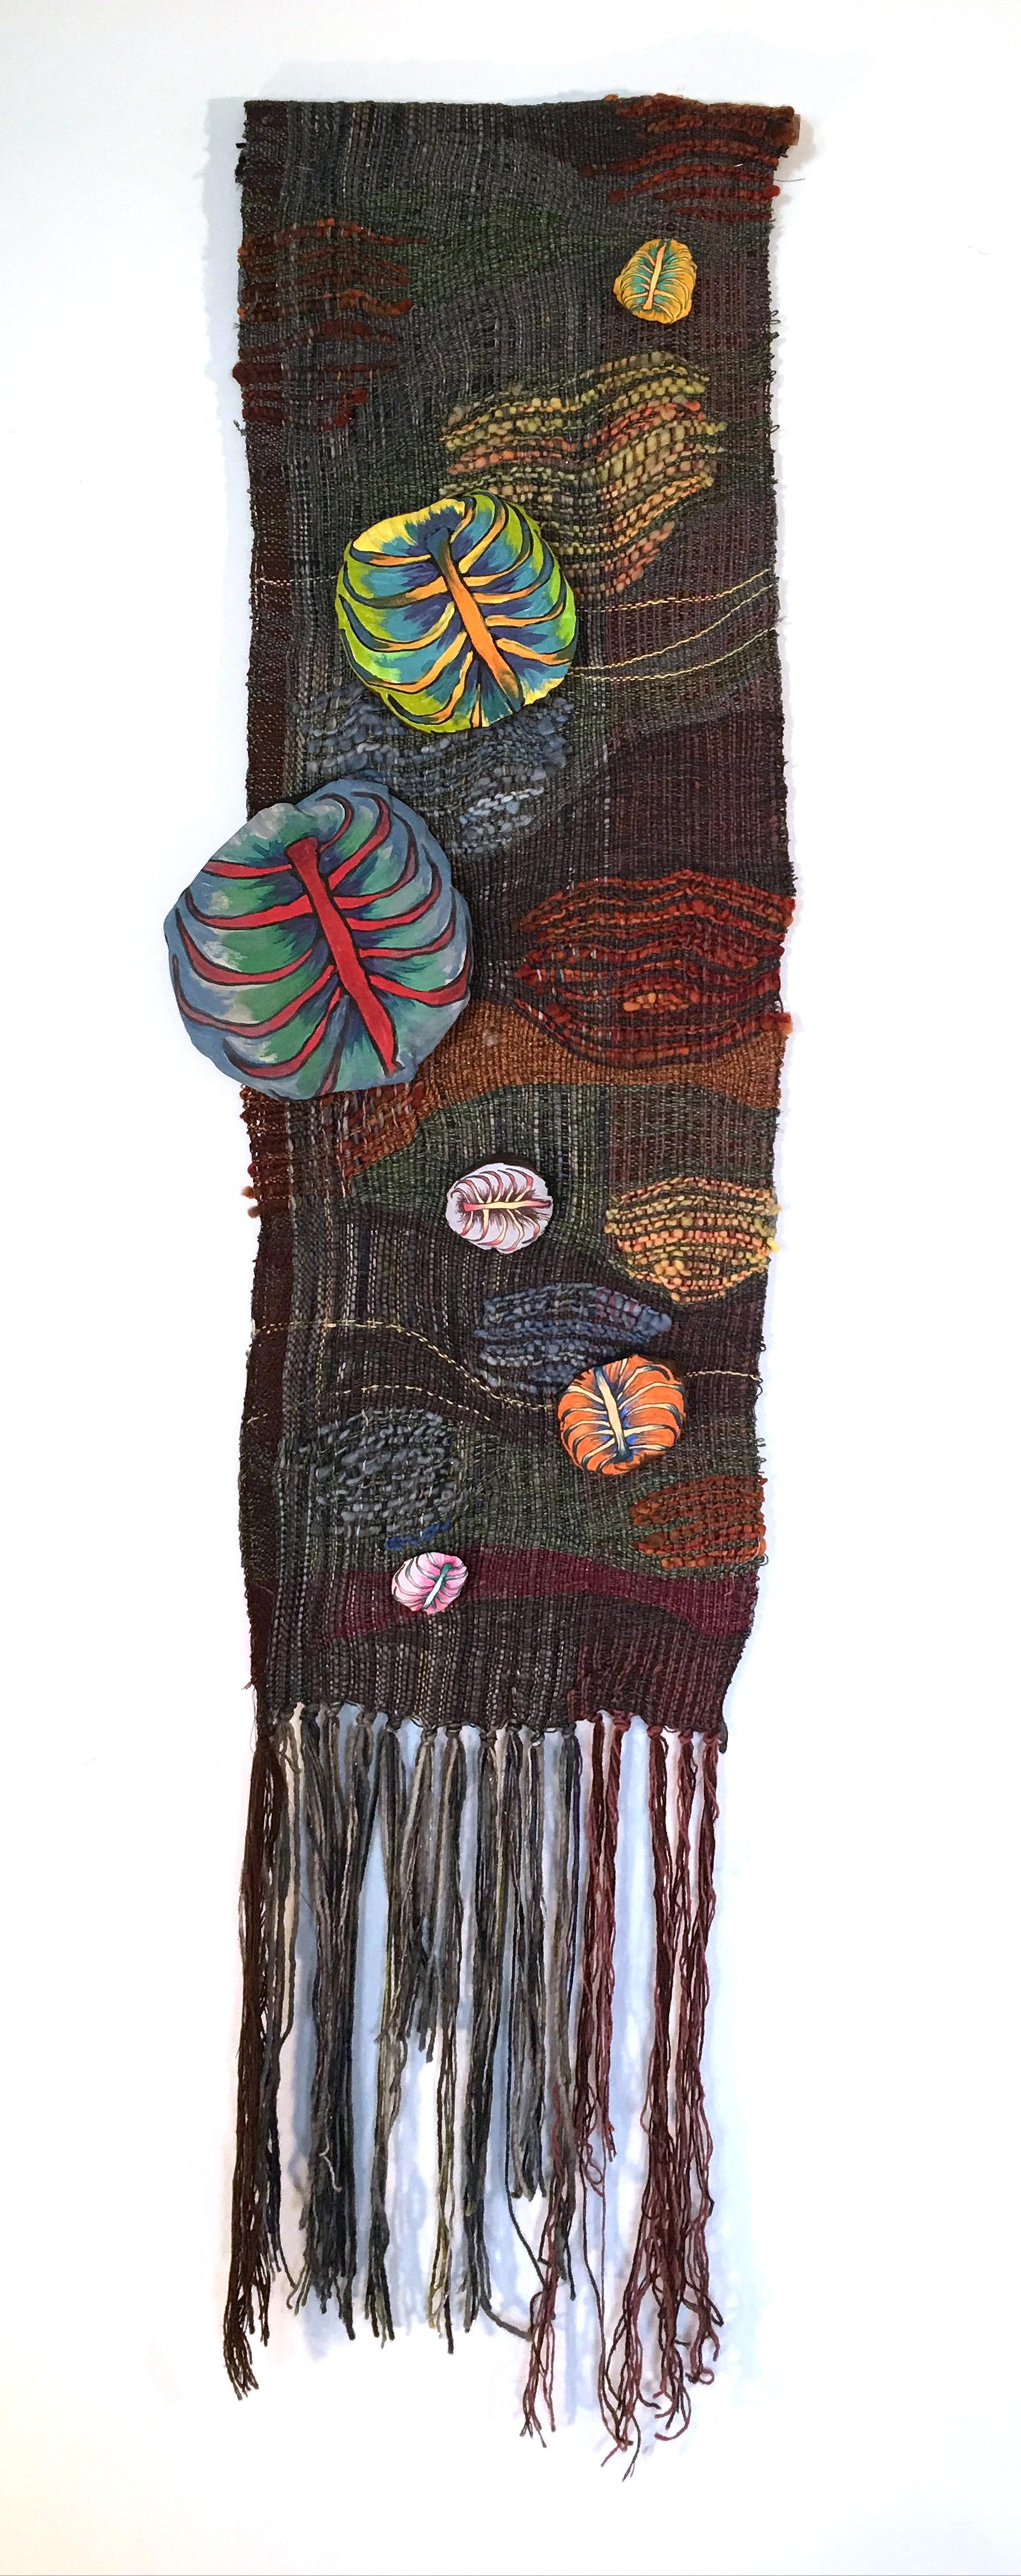 Textile Handwoven Wall Hanging: 'Rib from My Side Small' - Mixed Media Art by Juliet Martin